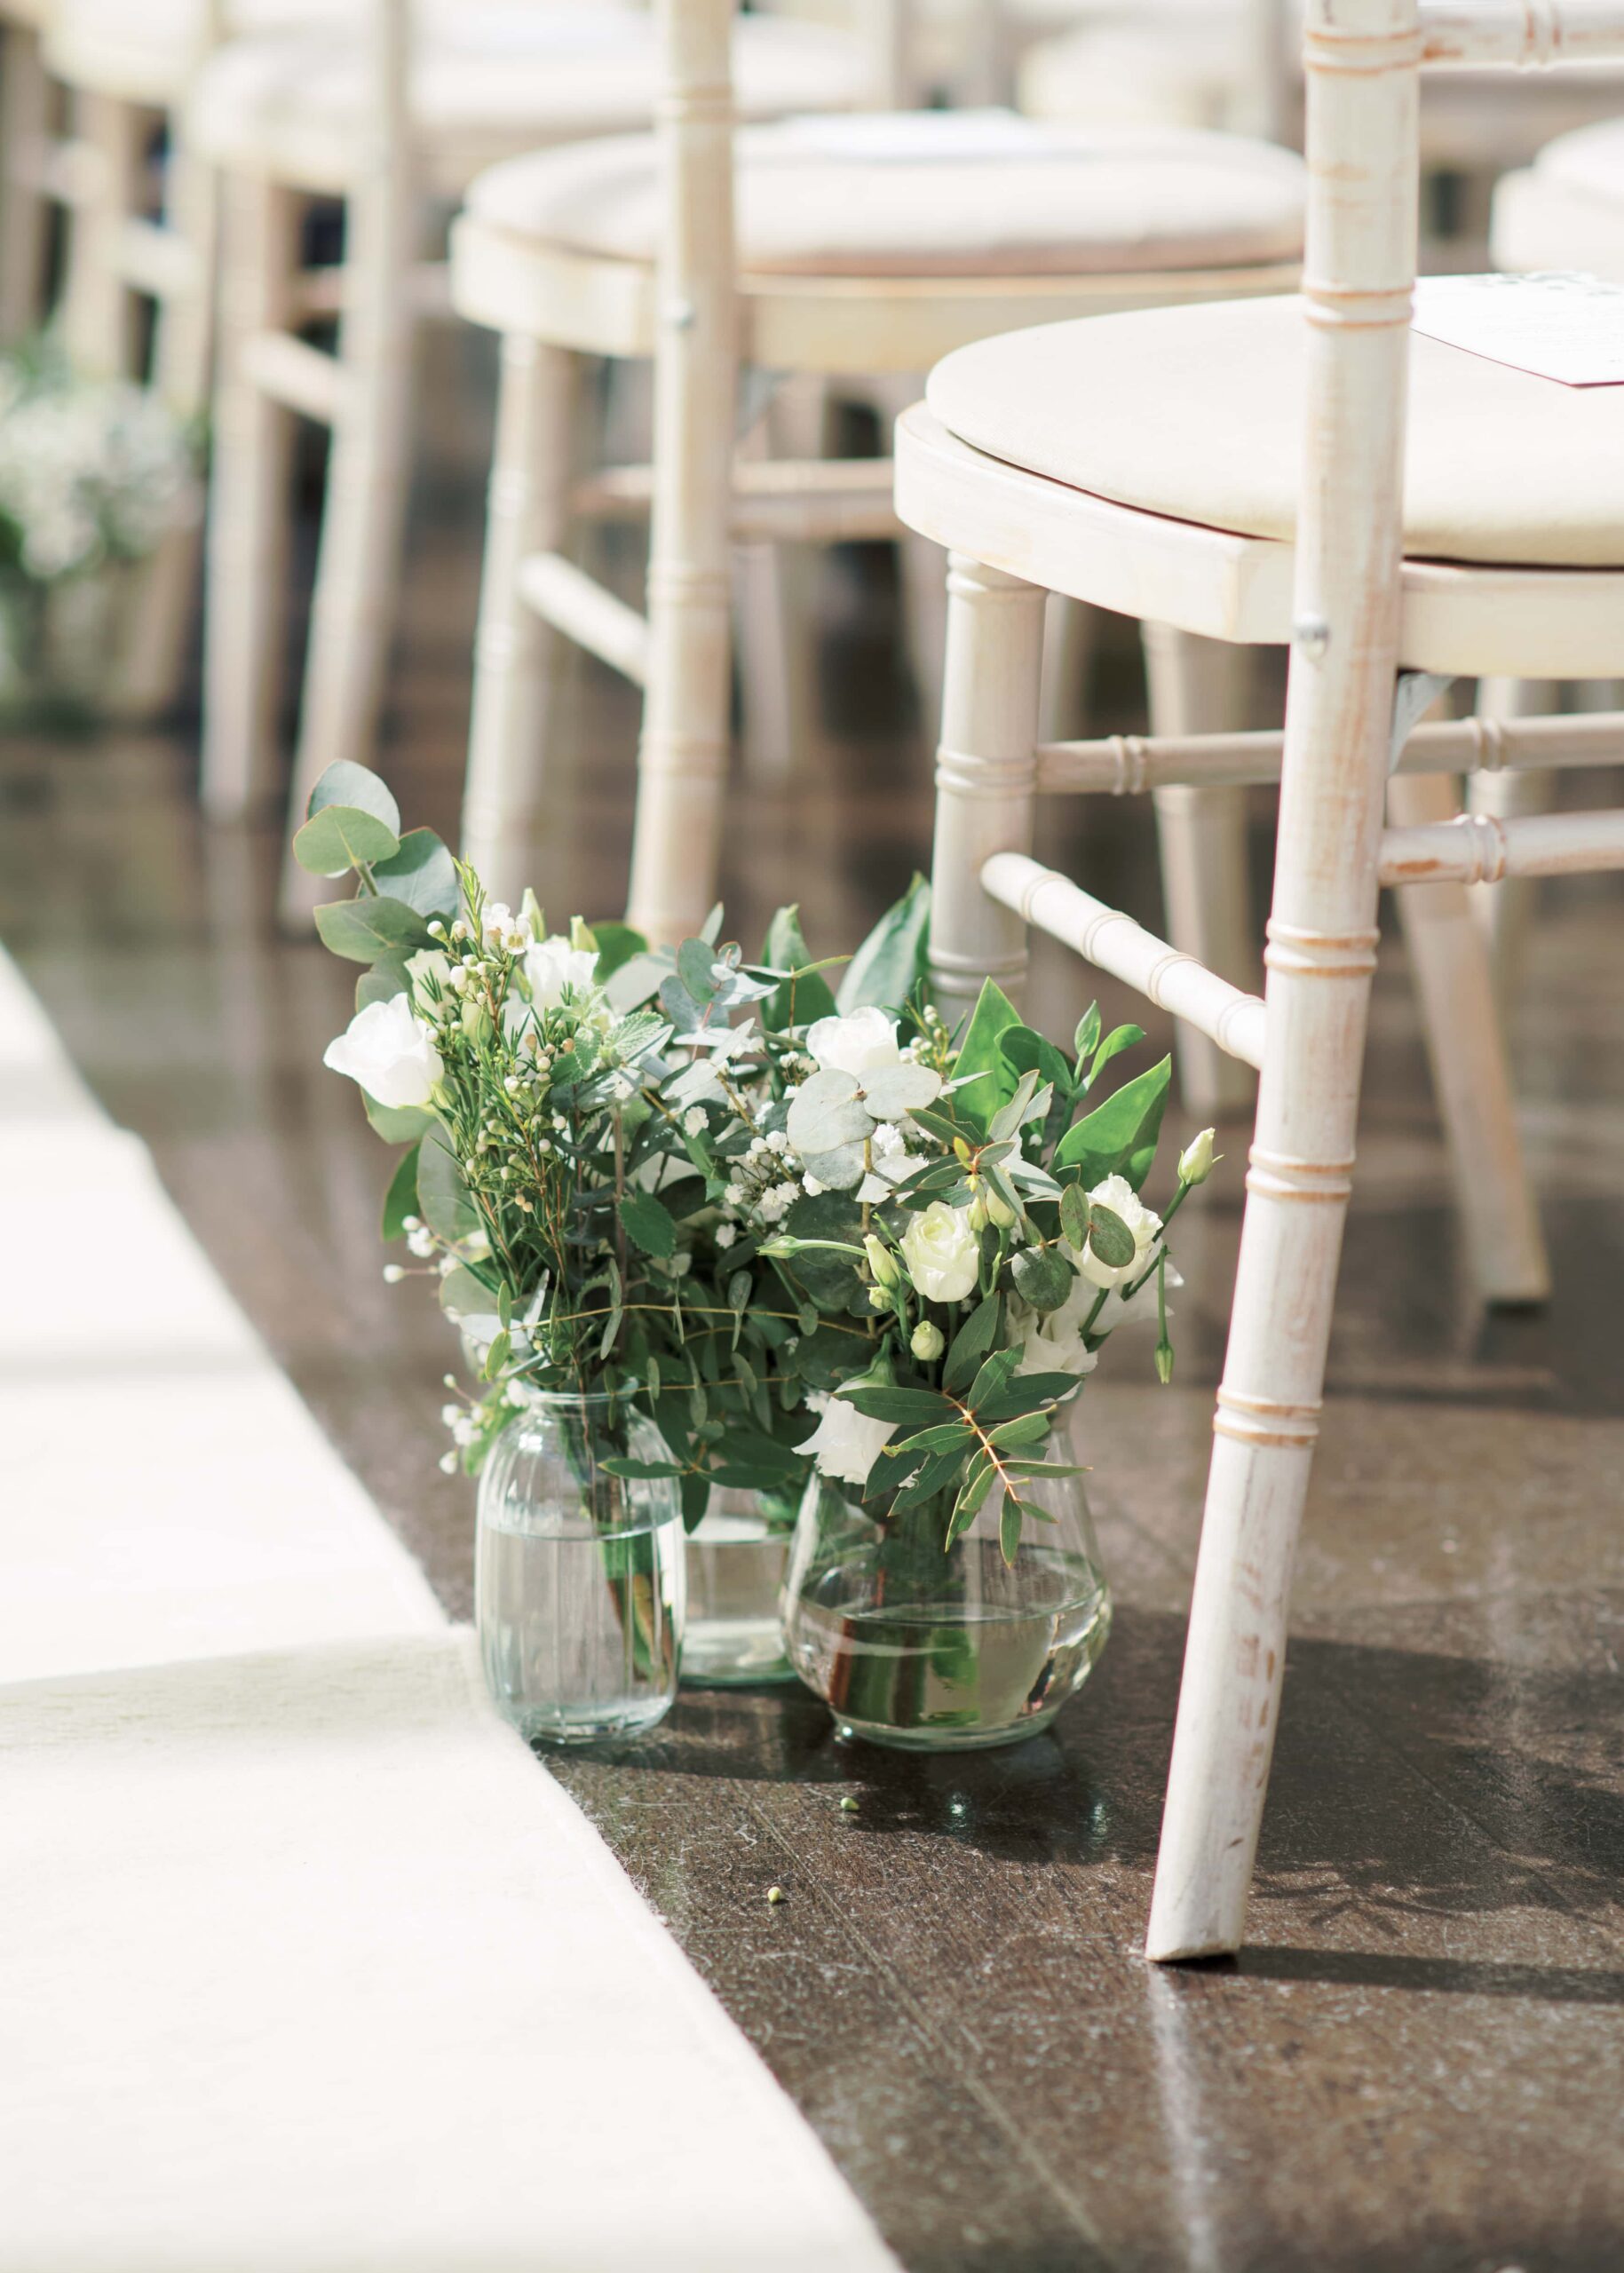 The brides' hand-made florals decorate the Orangery in Tankardstown House.